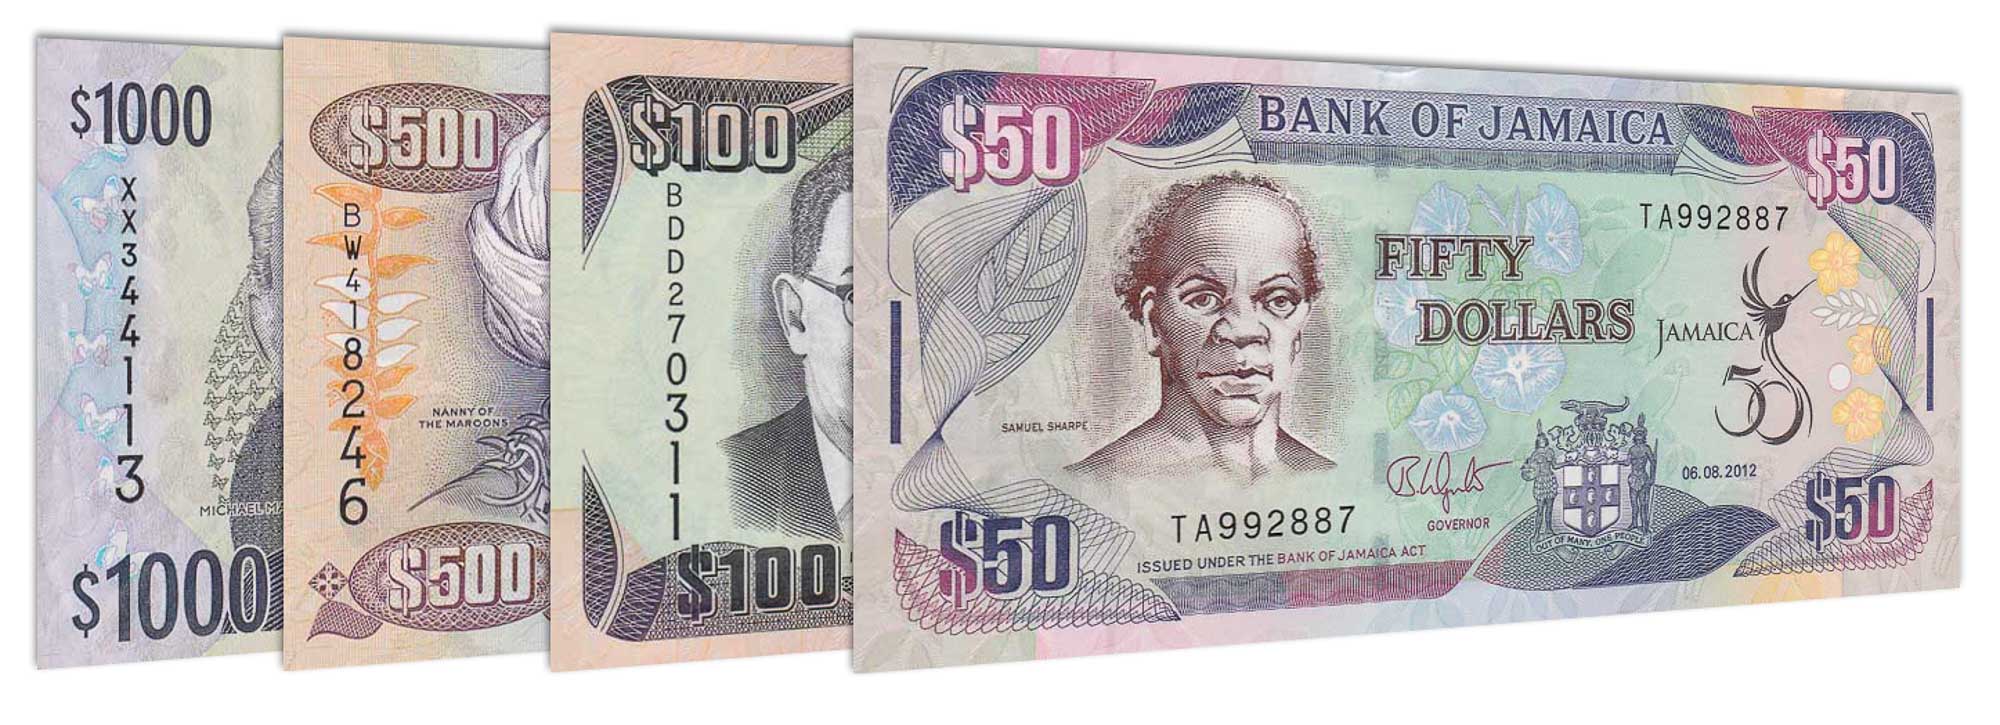 8000 jamaican dollars in pounds